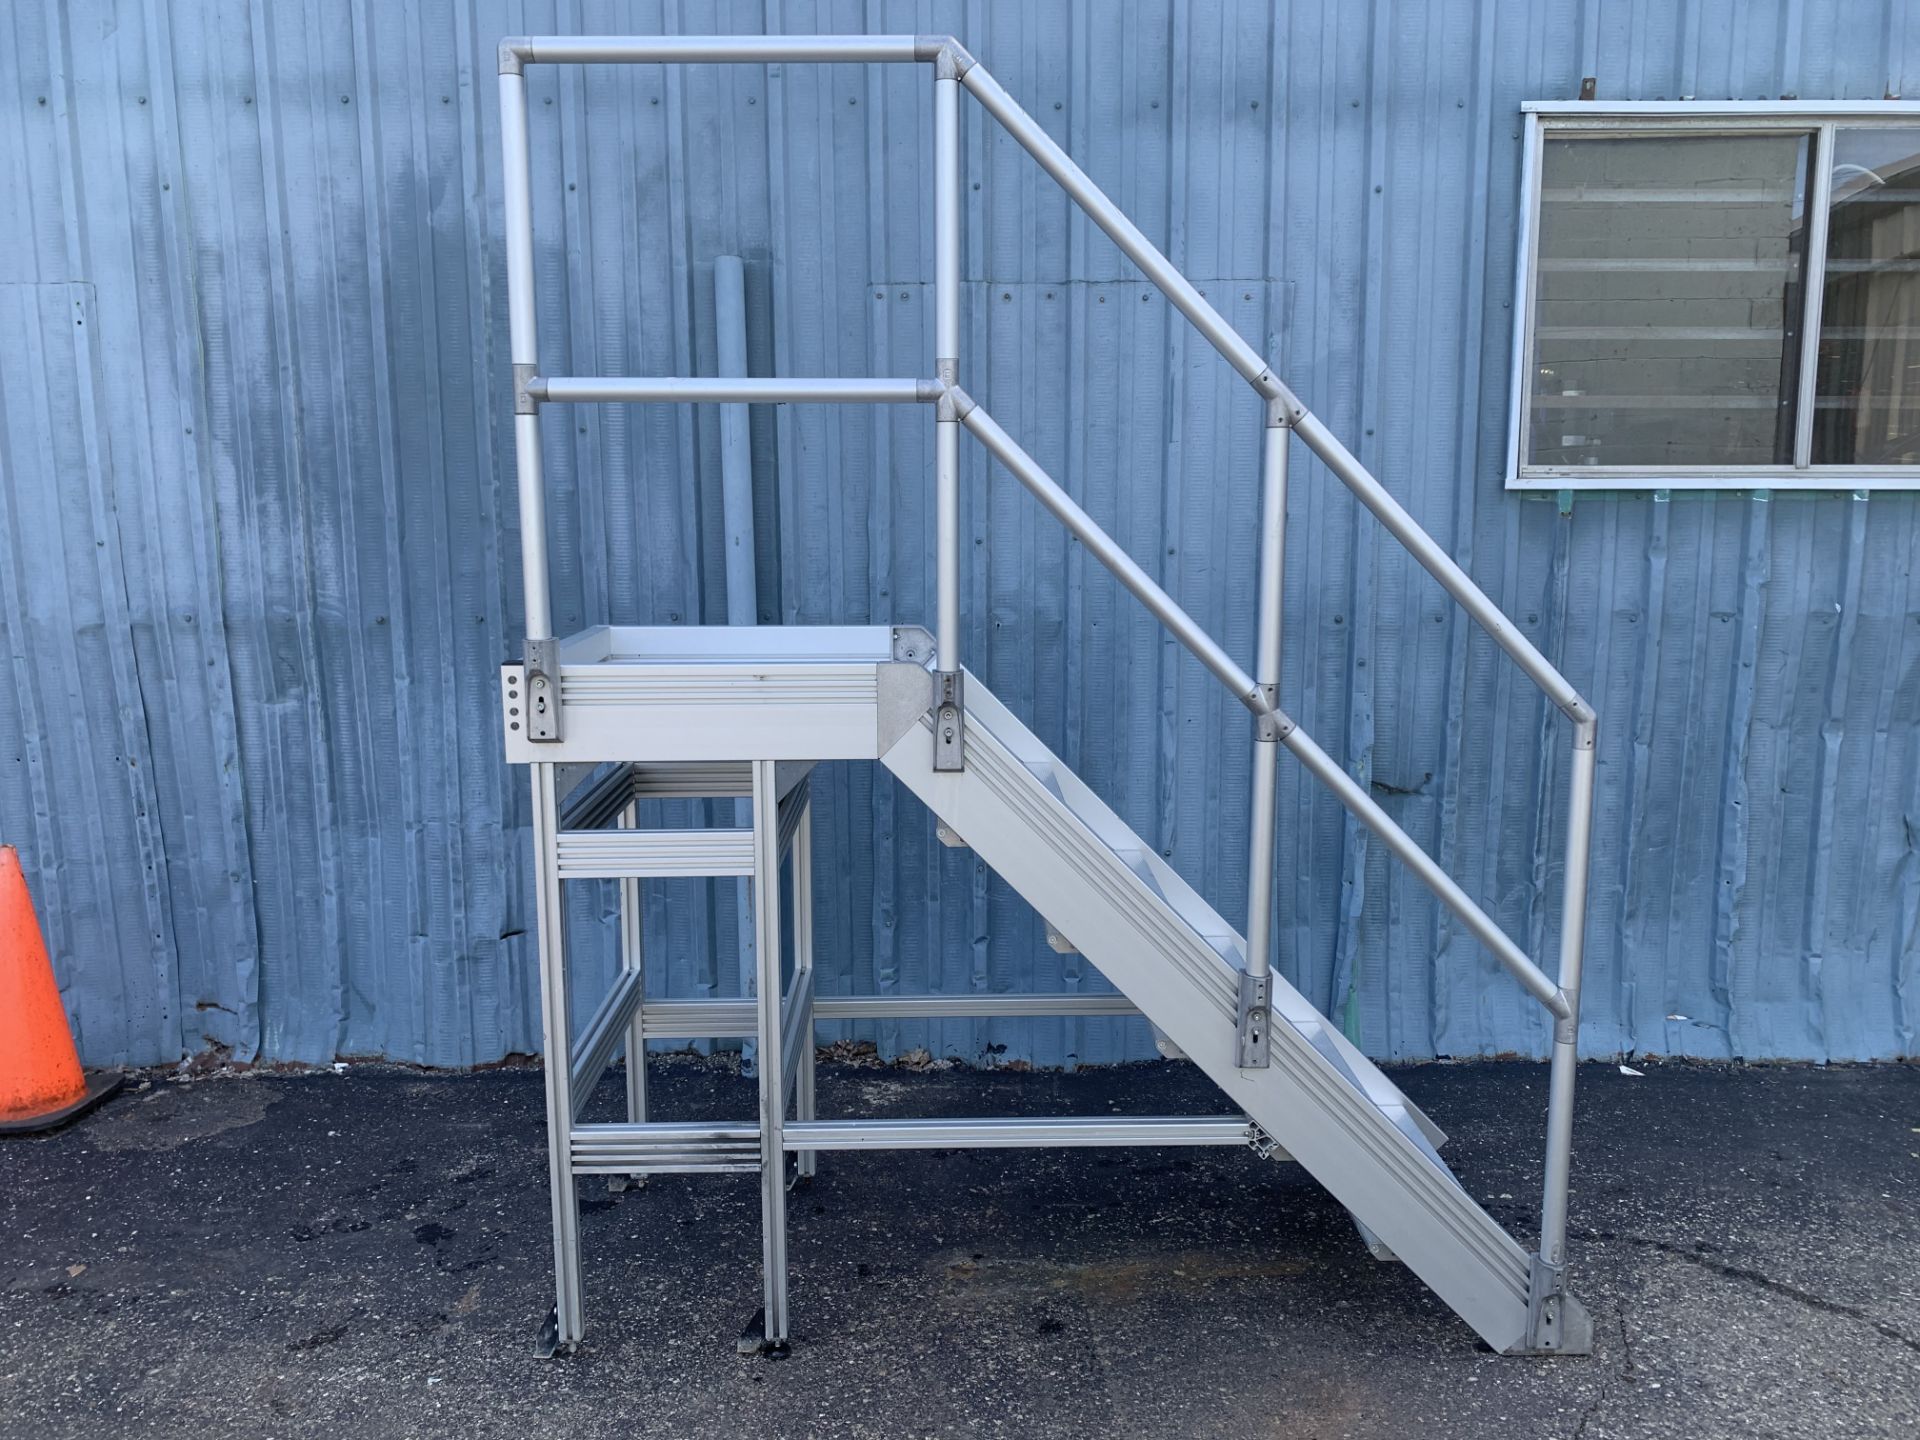 UNKNOWN BRAND ALUMINUM STAIRS WITH RAIL, 6-STEPS, TOP PLATFORM STEP 50" HIGH - Image 5 of 8